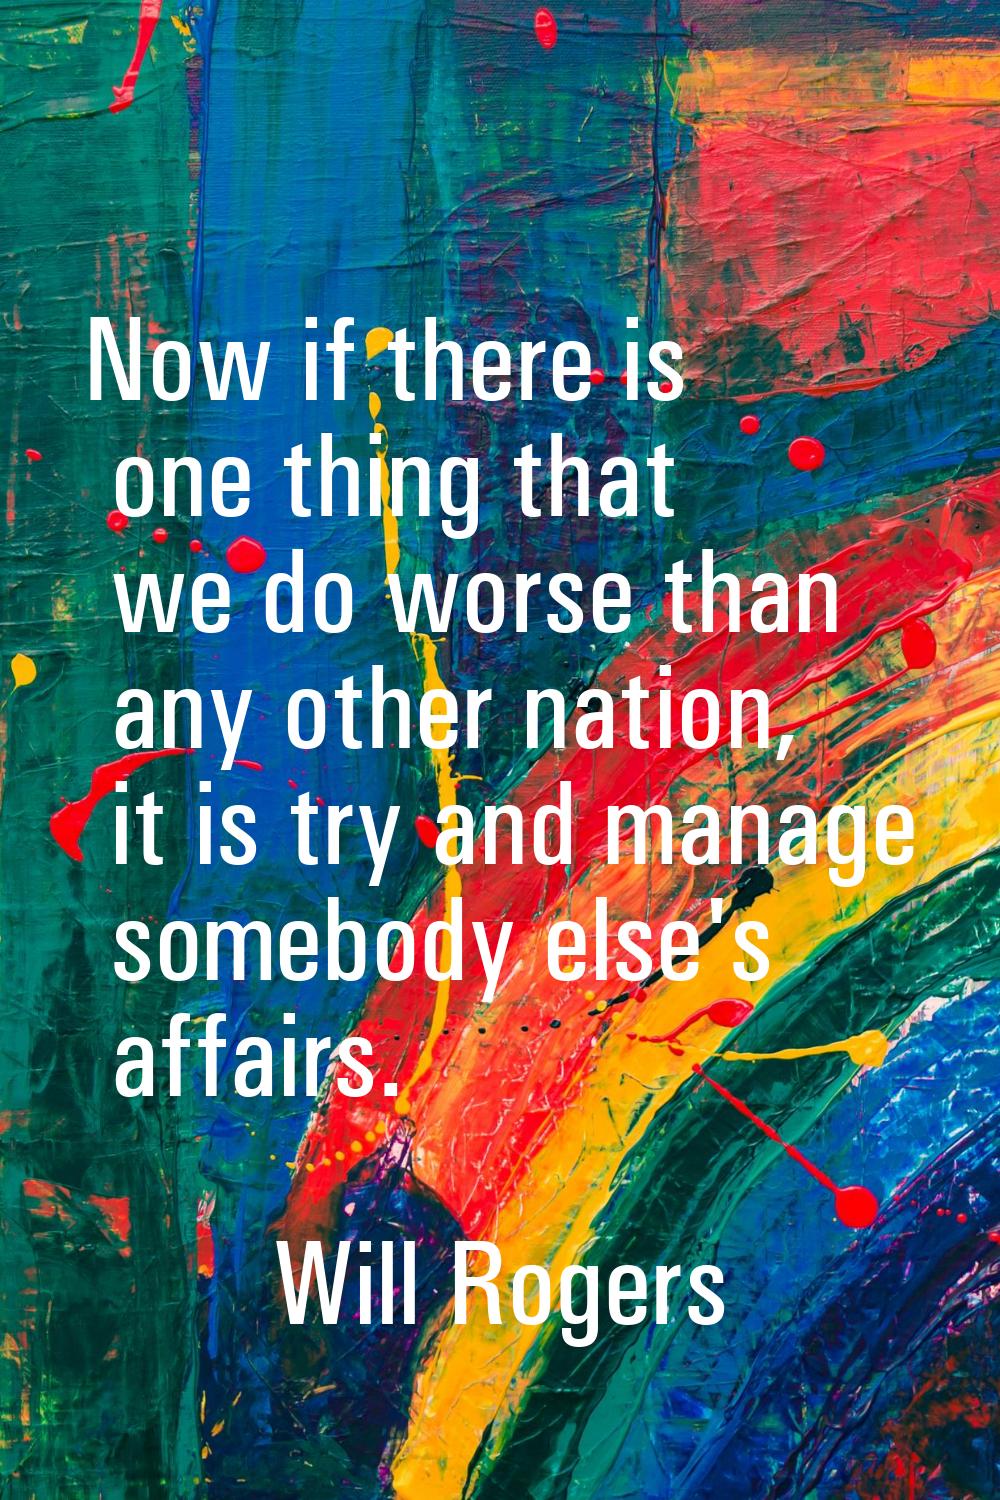 Now if there is one thing that we do worse than any other nation, it is try and manage somebody els